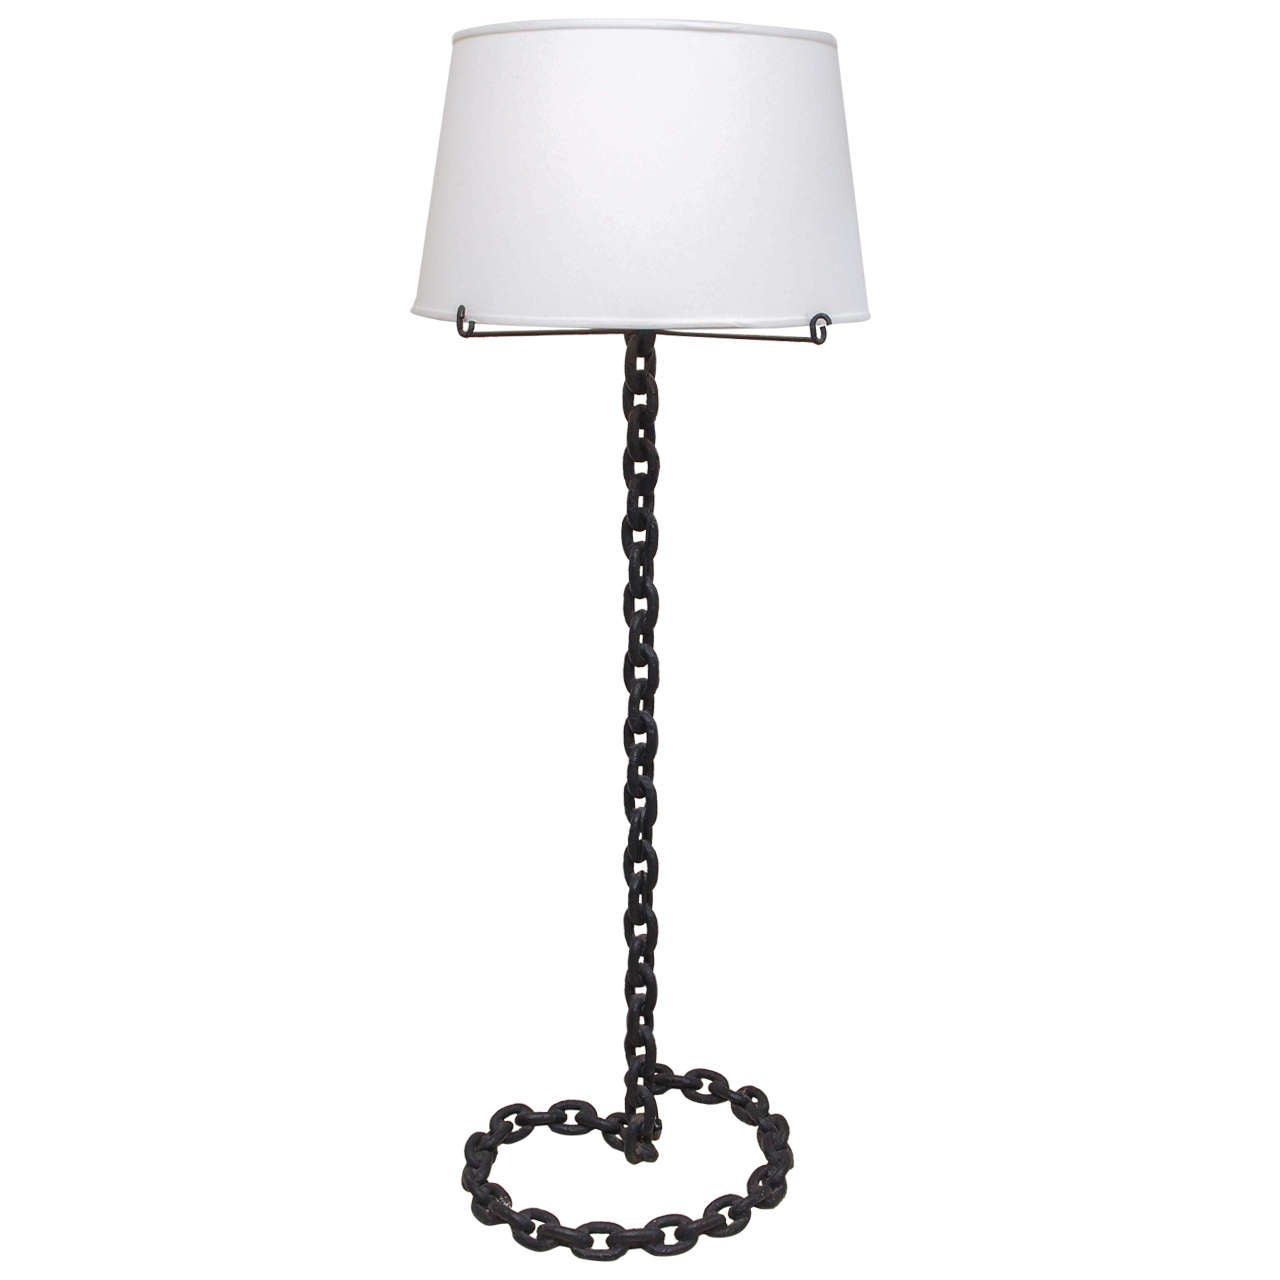 SATURDAY SALE Large Iron Chain-Link Floor Lamp For Sale